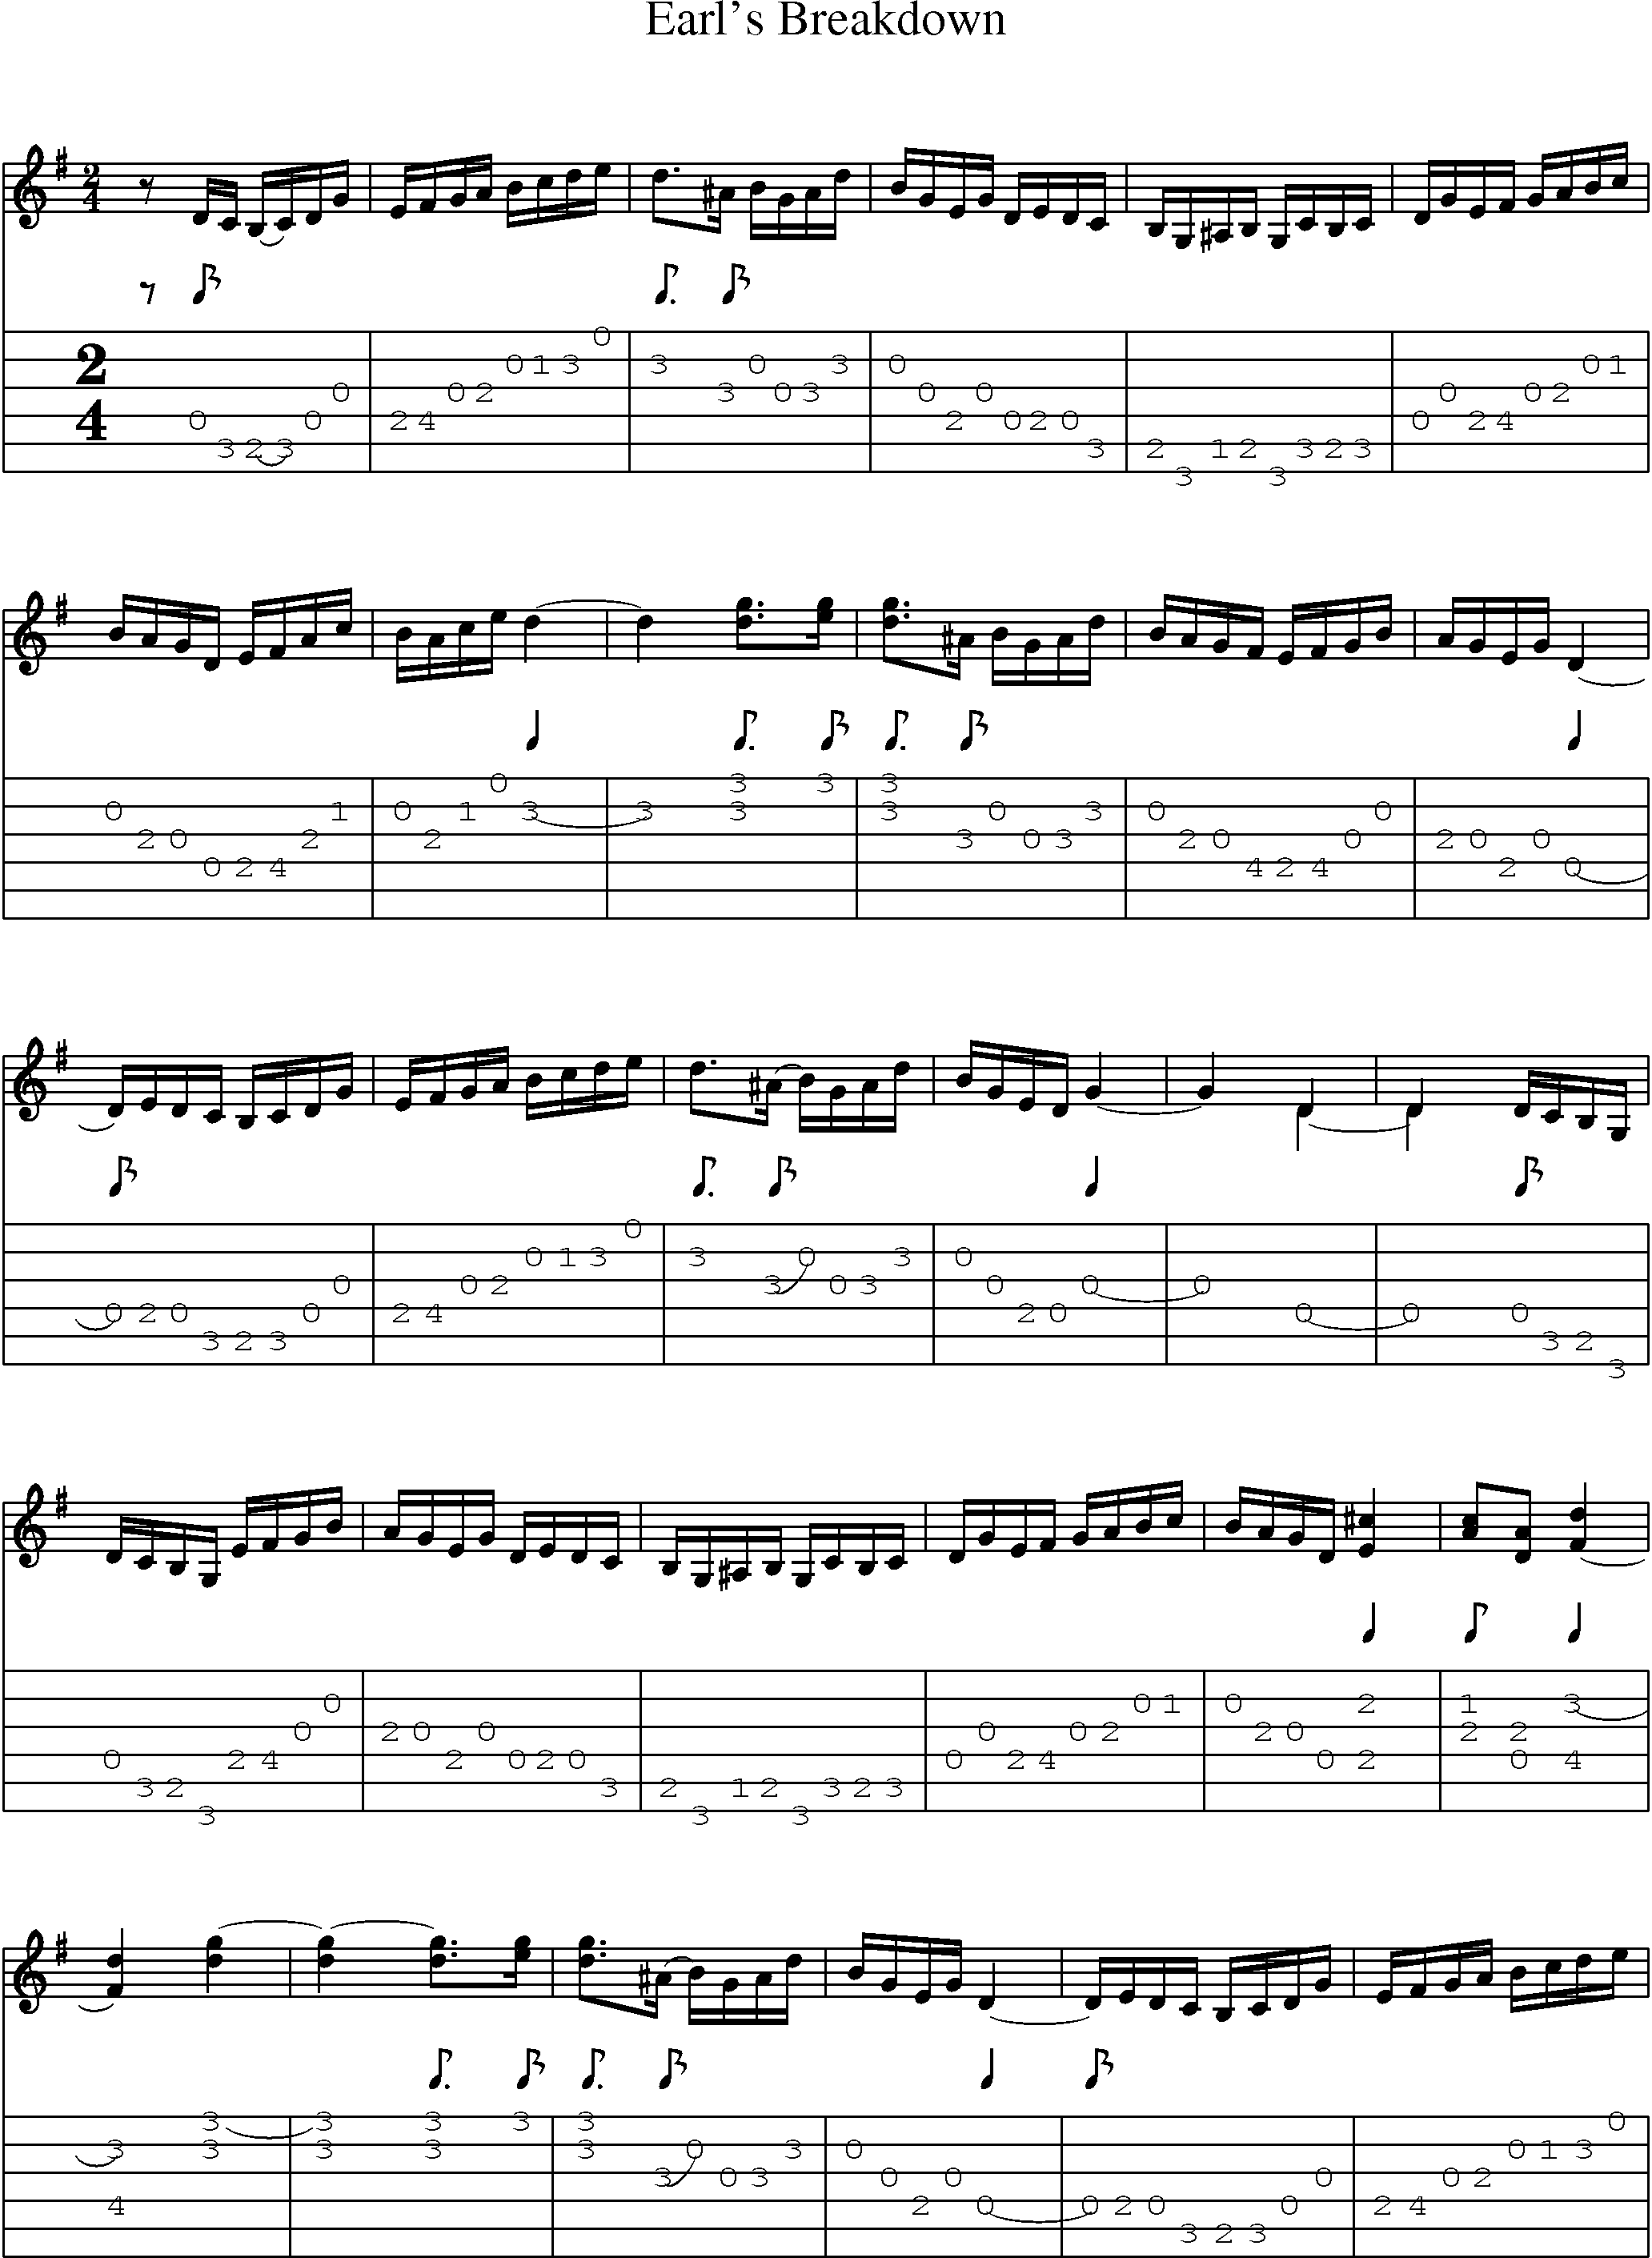 Music Score and Guitar Tabs for Earls Breakdown